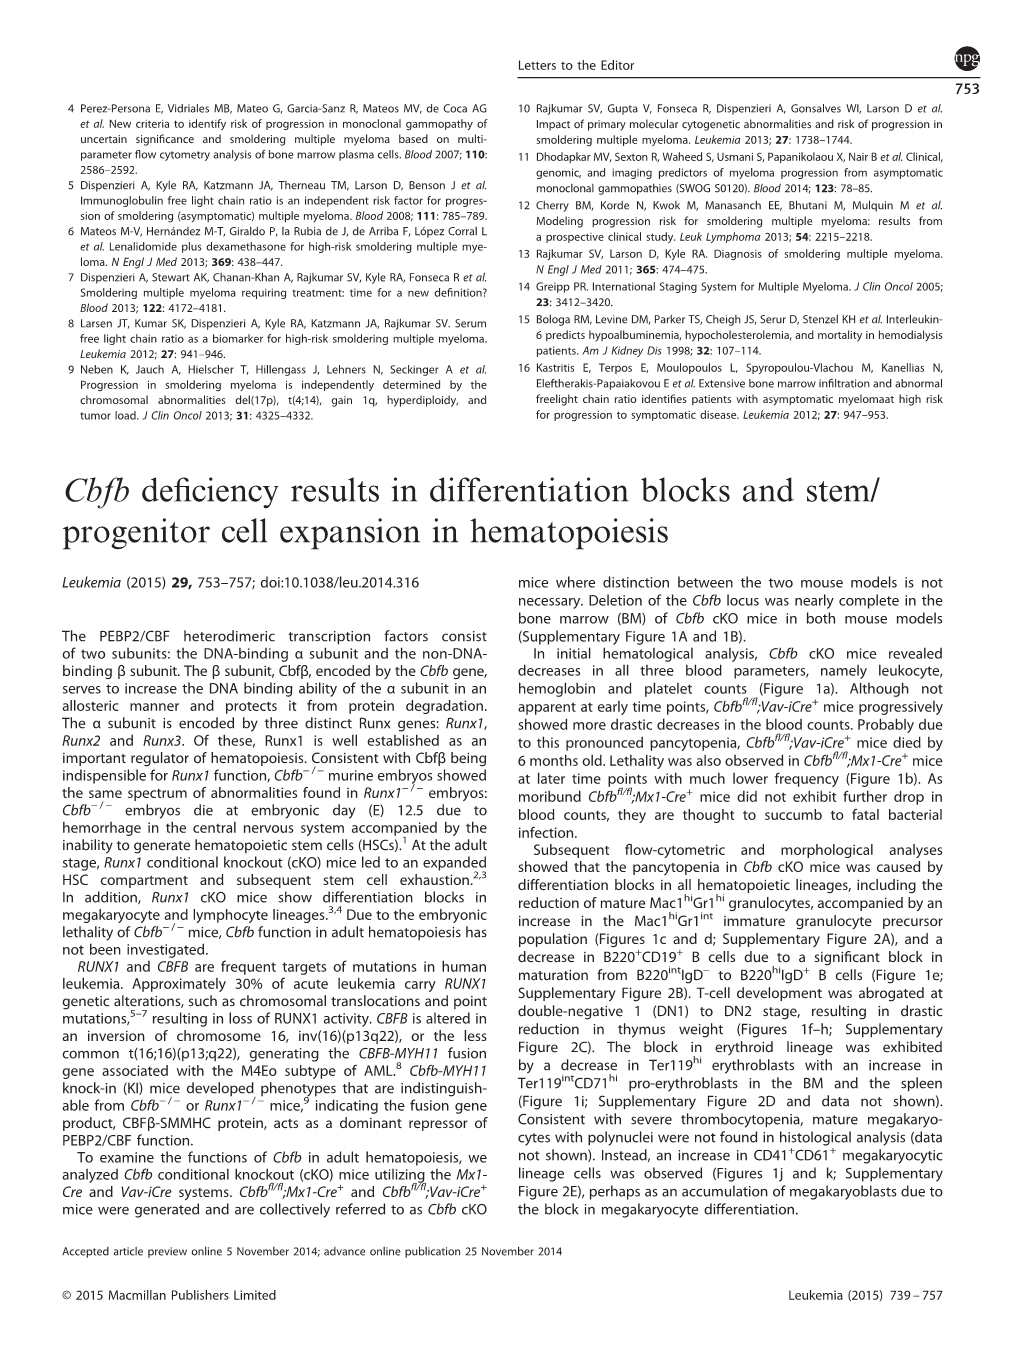 Cbfb Deﬁciency Results in Differentiation Blocks and Stem/ Progenitor Cell Expansion in Hematopoiesis